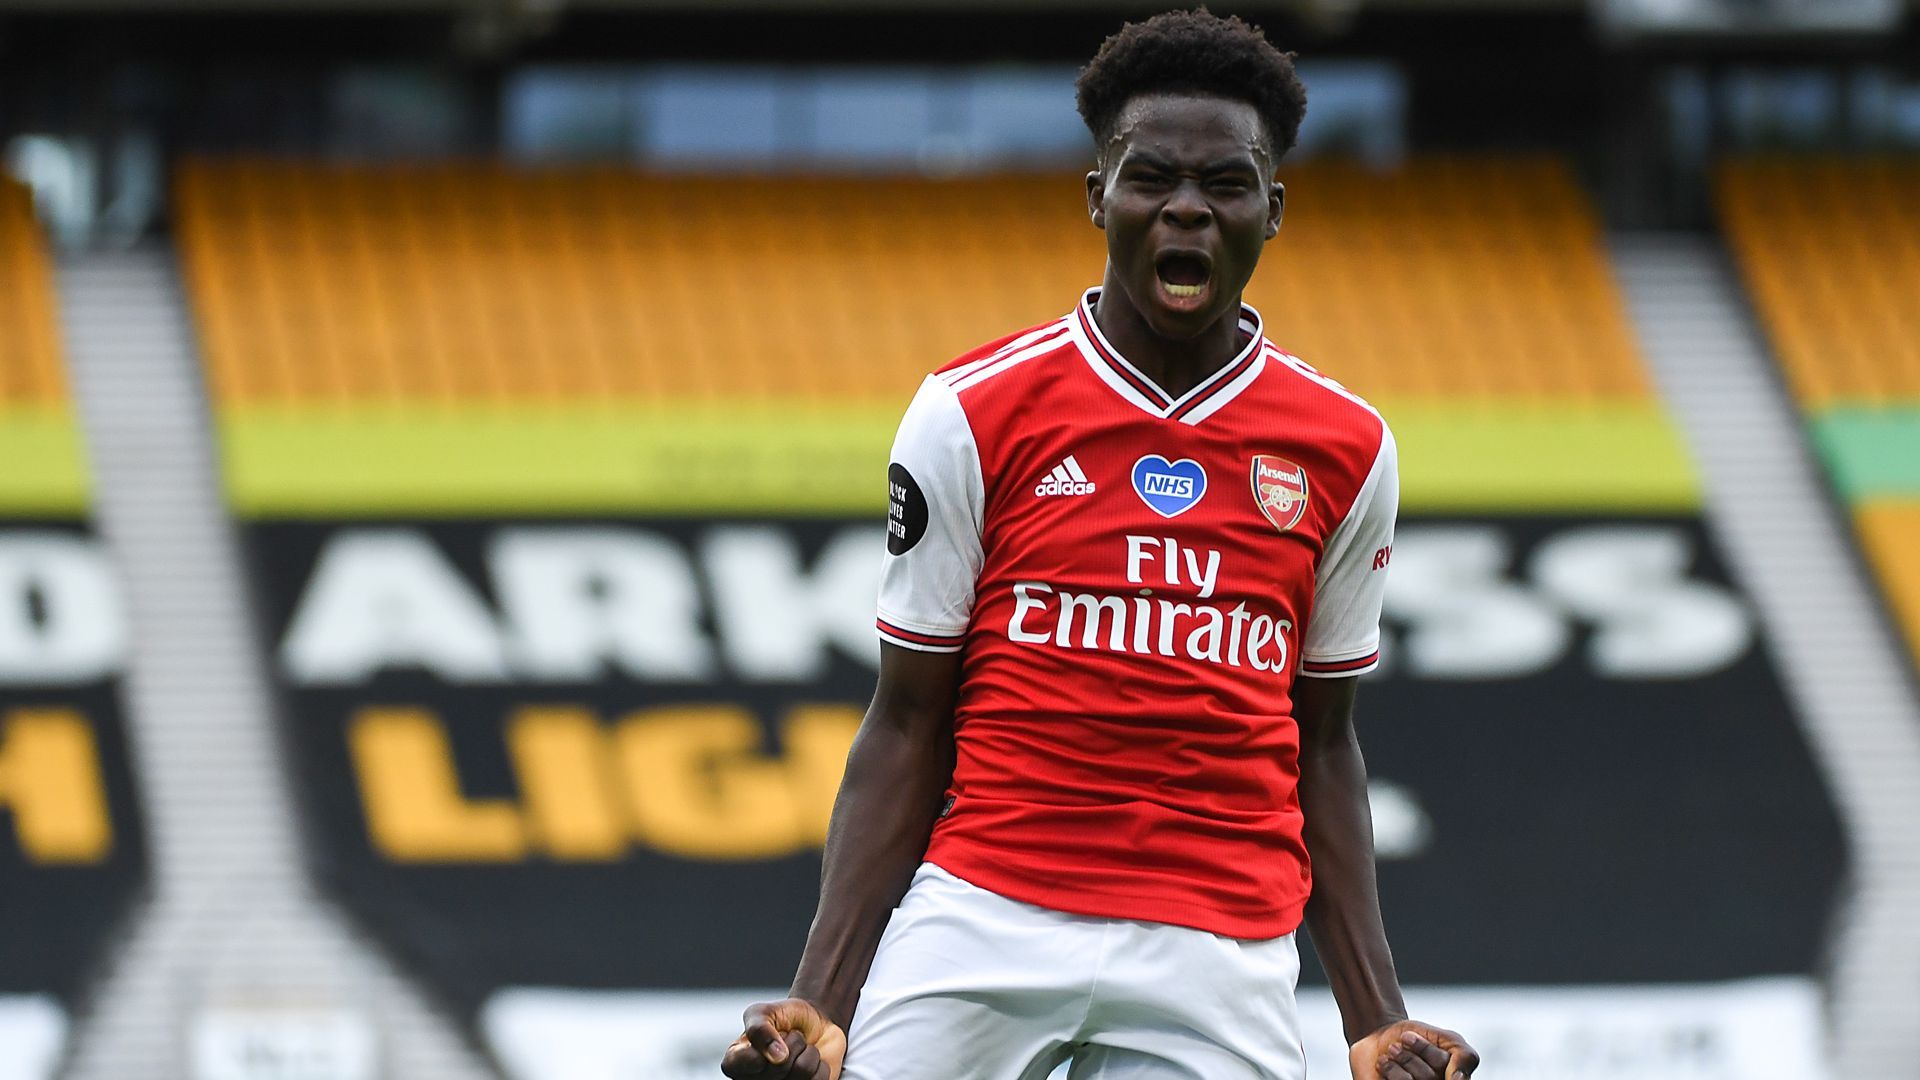 Watch Bukayo Saka score volley goal after signing new Arsenal contract